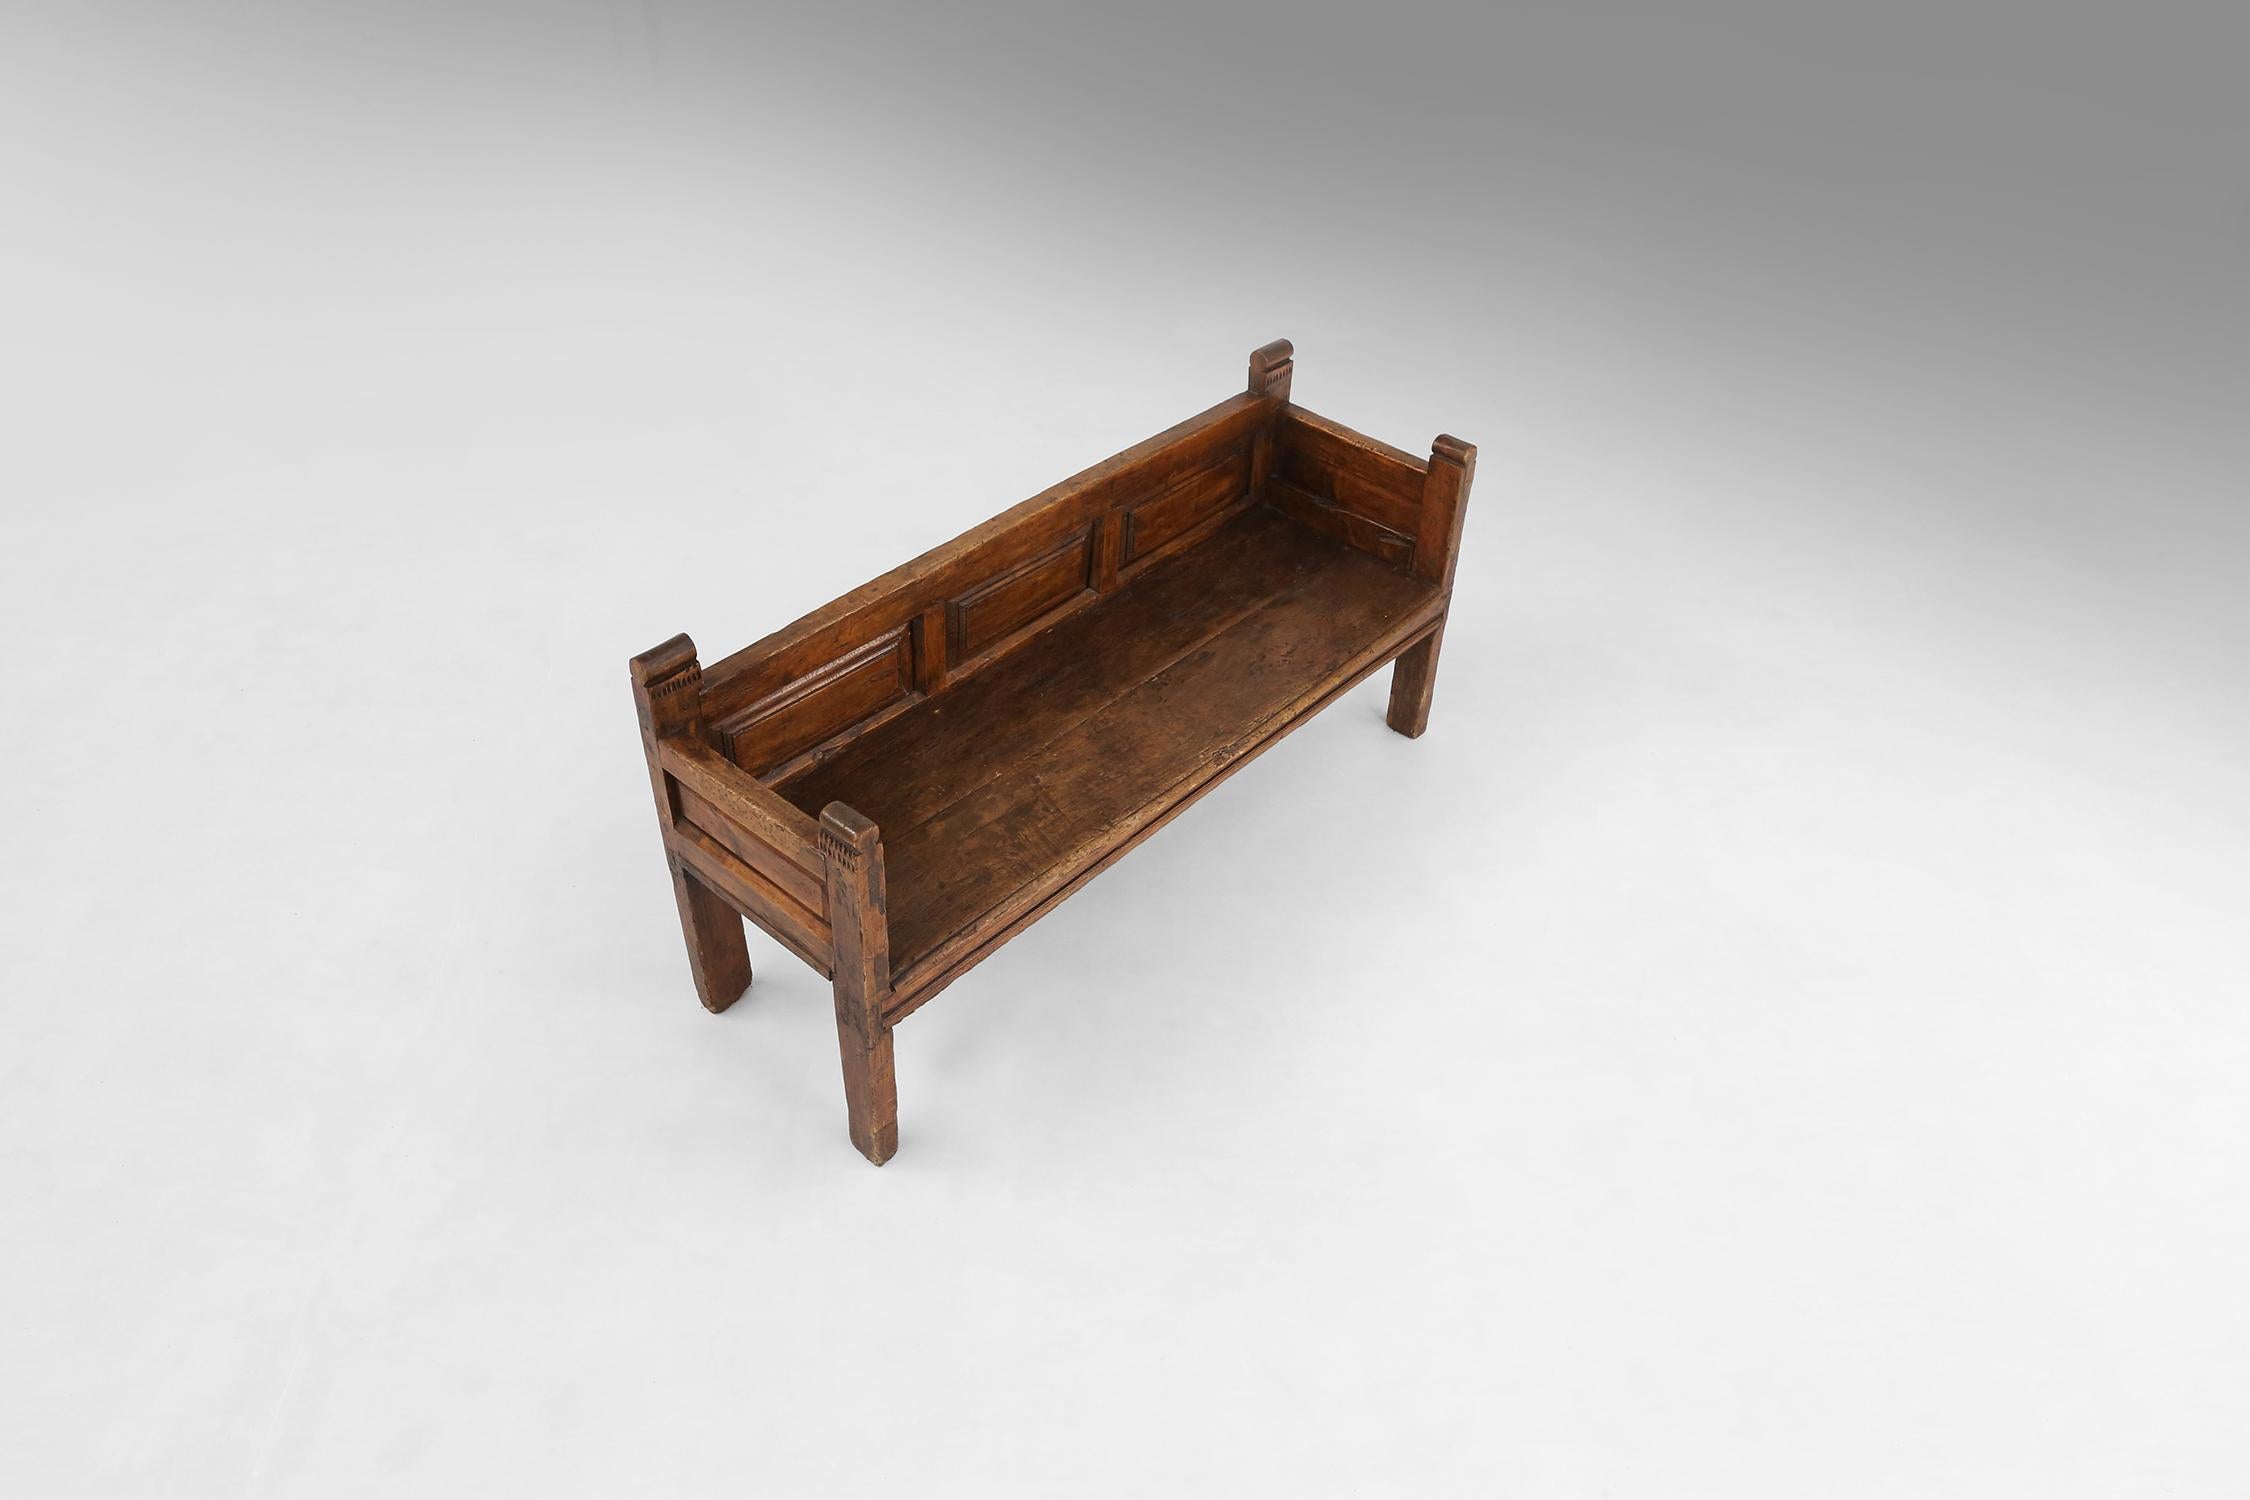 French Rustic wooden bench 19th century